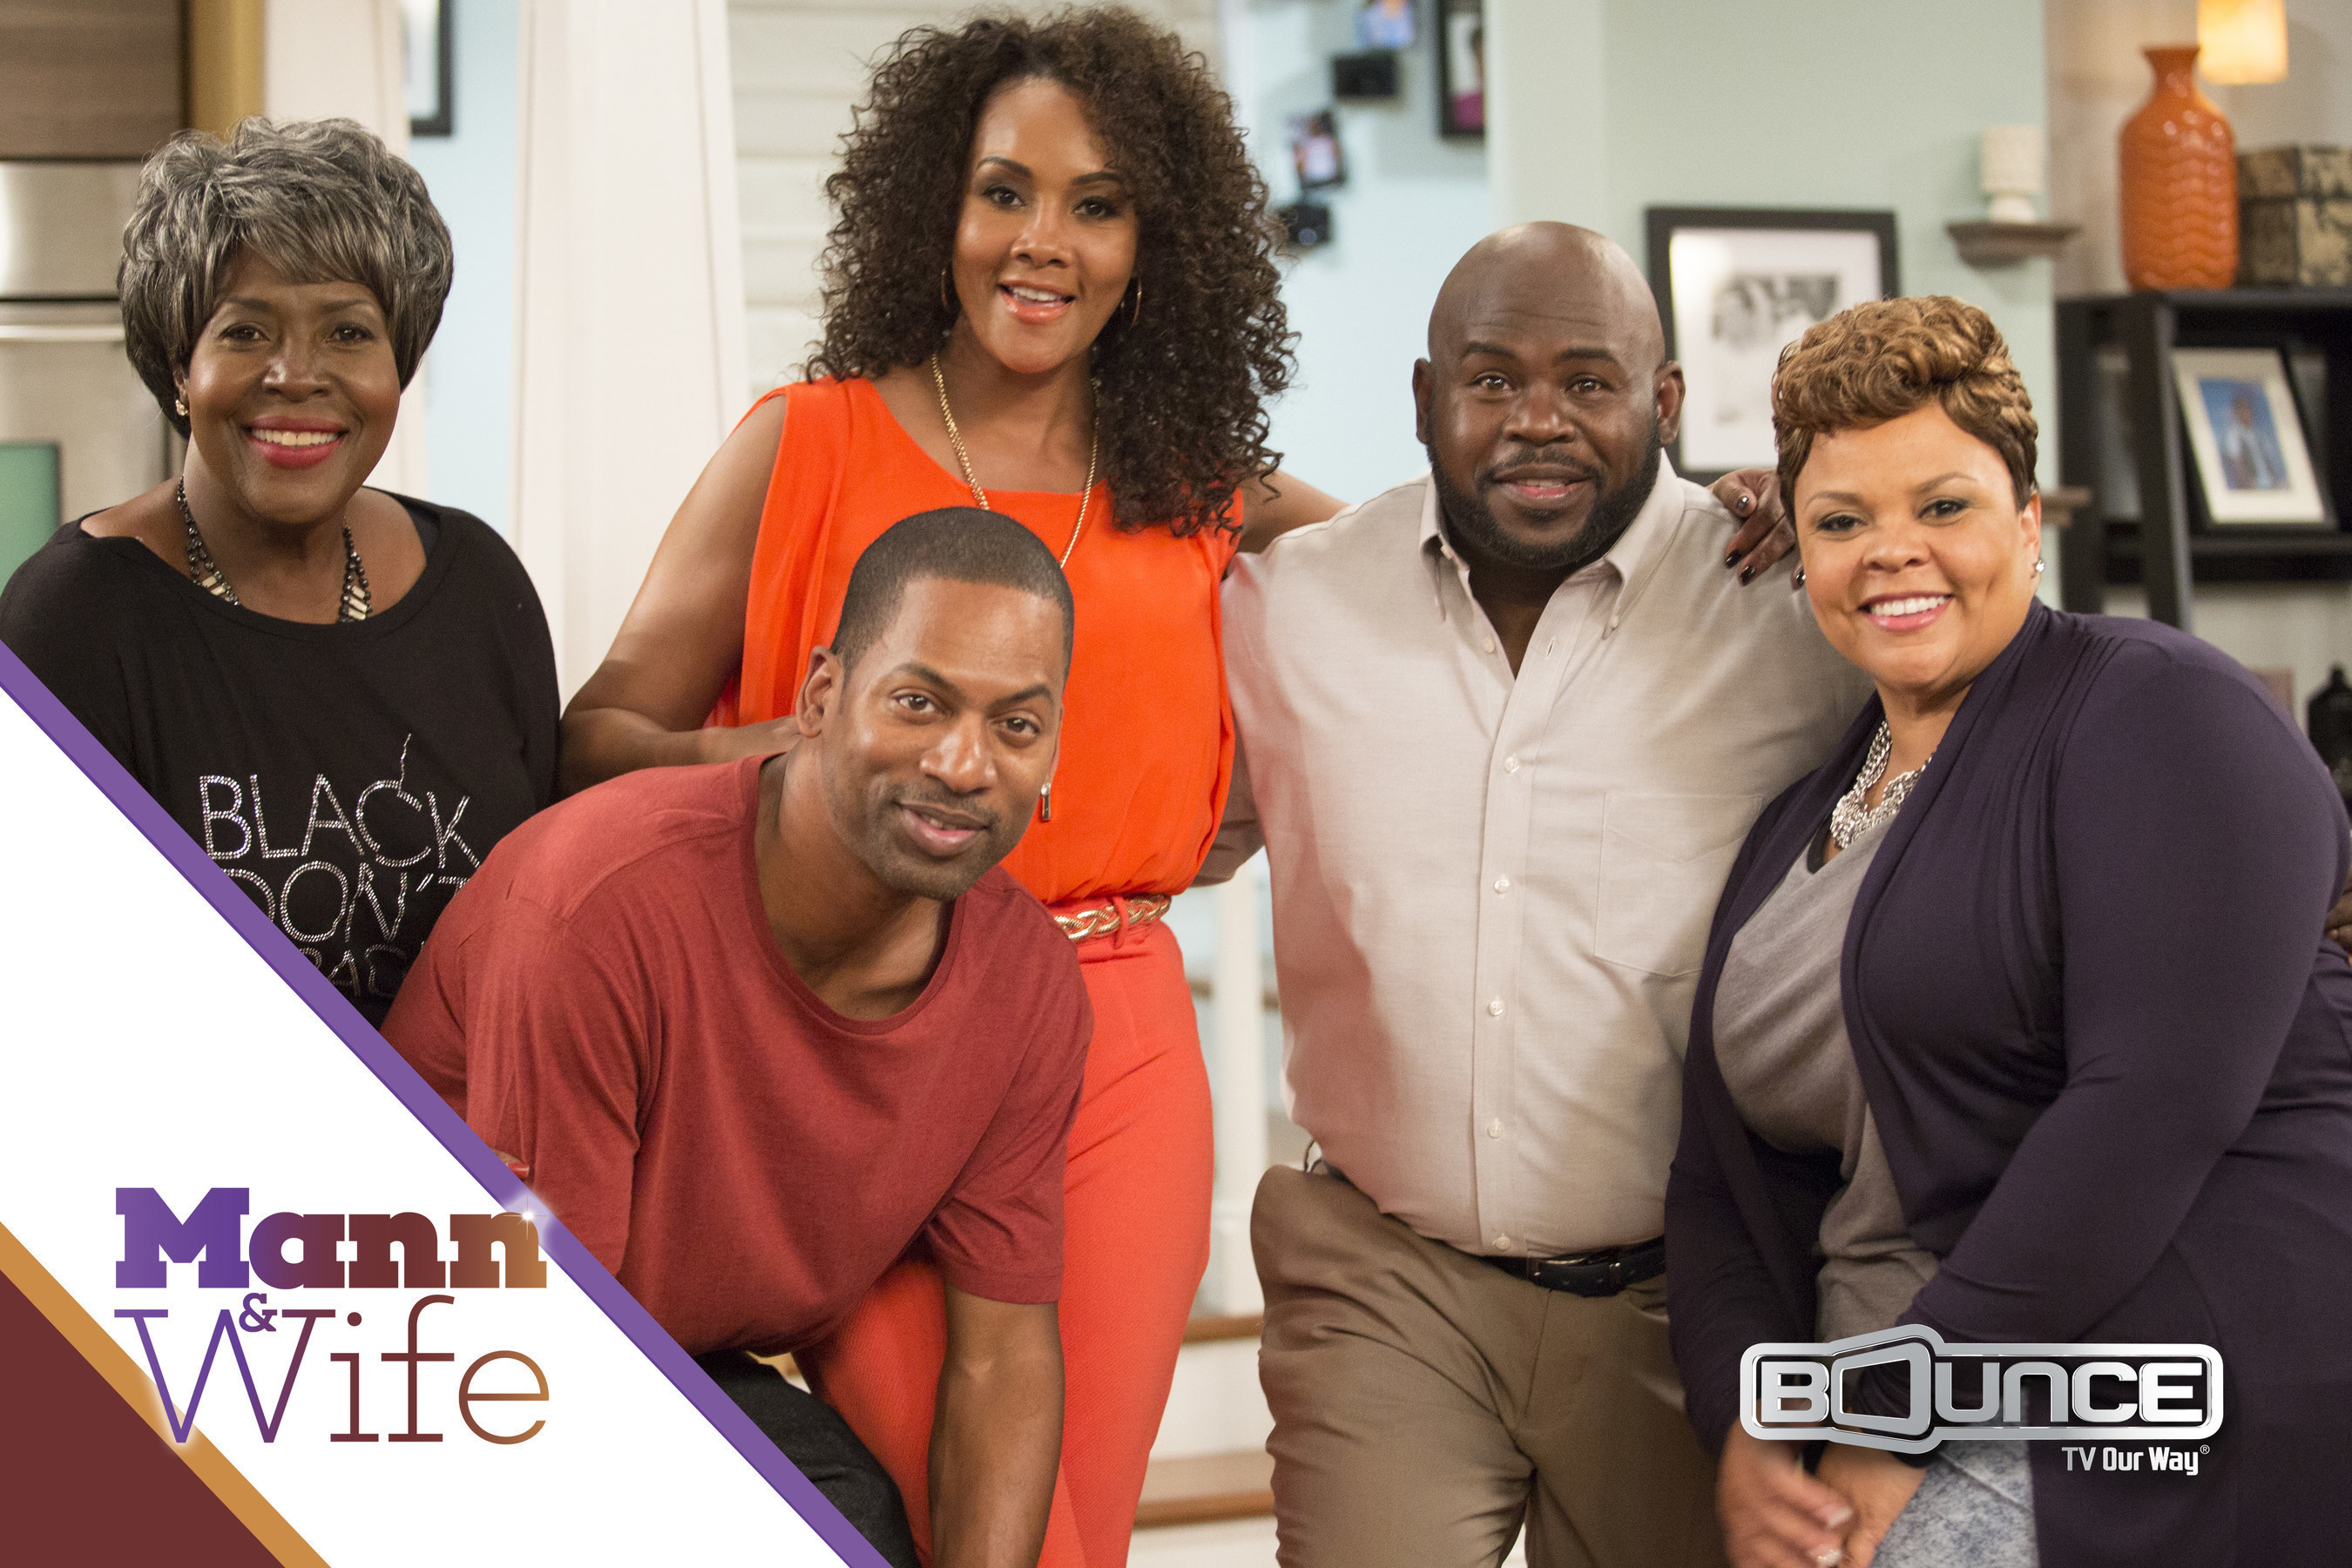 New episodes of the new hit comedy series Mann & Wife, starring David & Tamela Mann (Right) premiere Tuesday nights at 9:00 p.m. ET/8:00 p.m. CT on Bounce TV. Vivica A. Fox, JoMarie Payton and Tony Rock co-star. The series follows the newlywed, second-chance sweethearts as they laugh and love their way through the ups and downs of life as a blended family, each with two children from previous marriages. Bounce TV is the nation's first-ever and fastest-growing broadcast television network designed for...